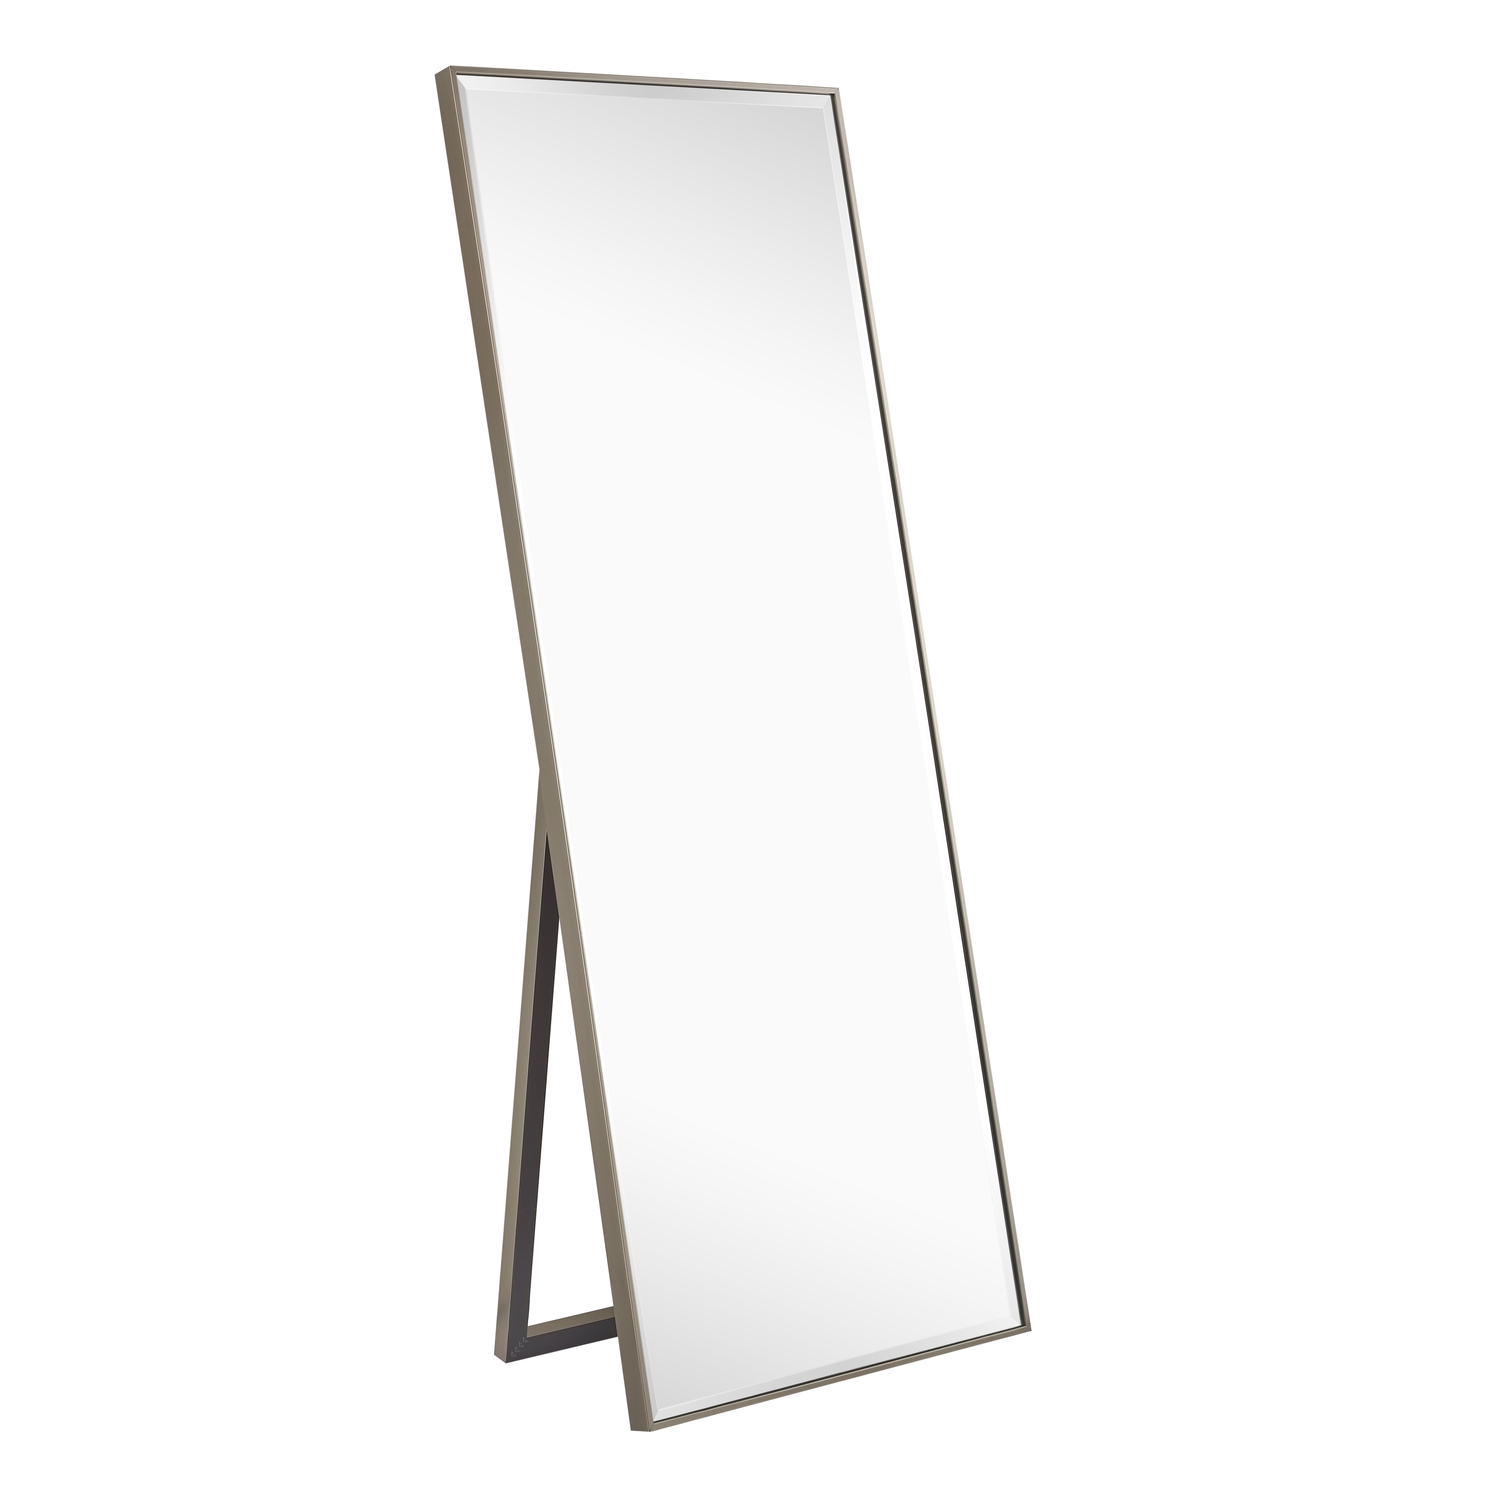 Naomi Home Modern Full Length Mirror, Large Freestanding Floor/Wall Mirror, Full Body Dressing Mirror for Bedroom, Living Room, Office - 66" x 24", Silver - image 5 of 7